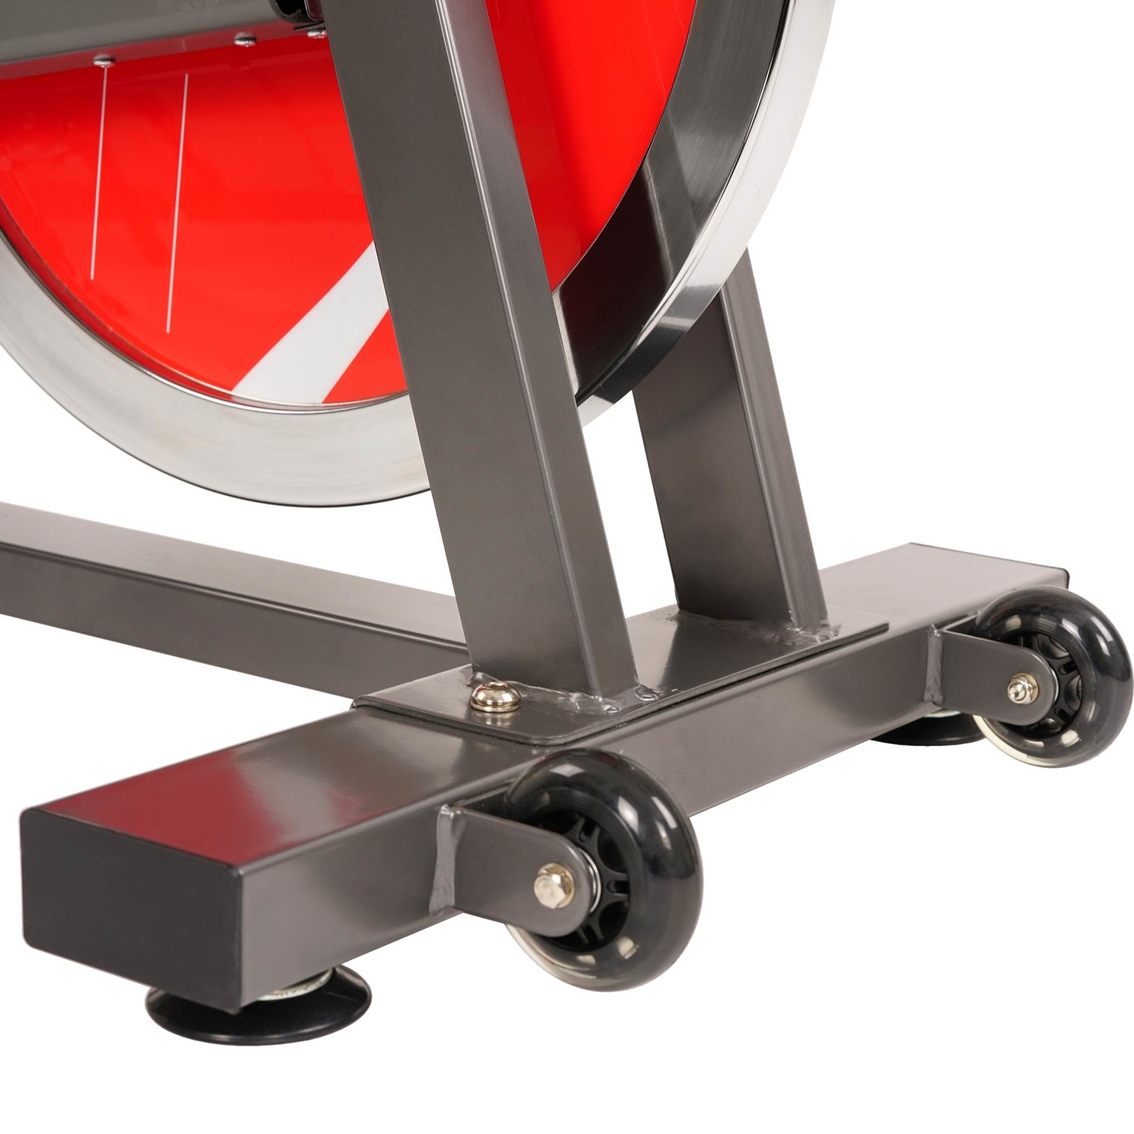 Sunny Health & Fitness Belt Drive Indoor Cycling Bike - Image 4 of 4